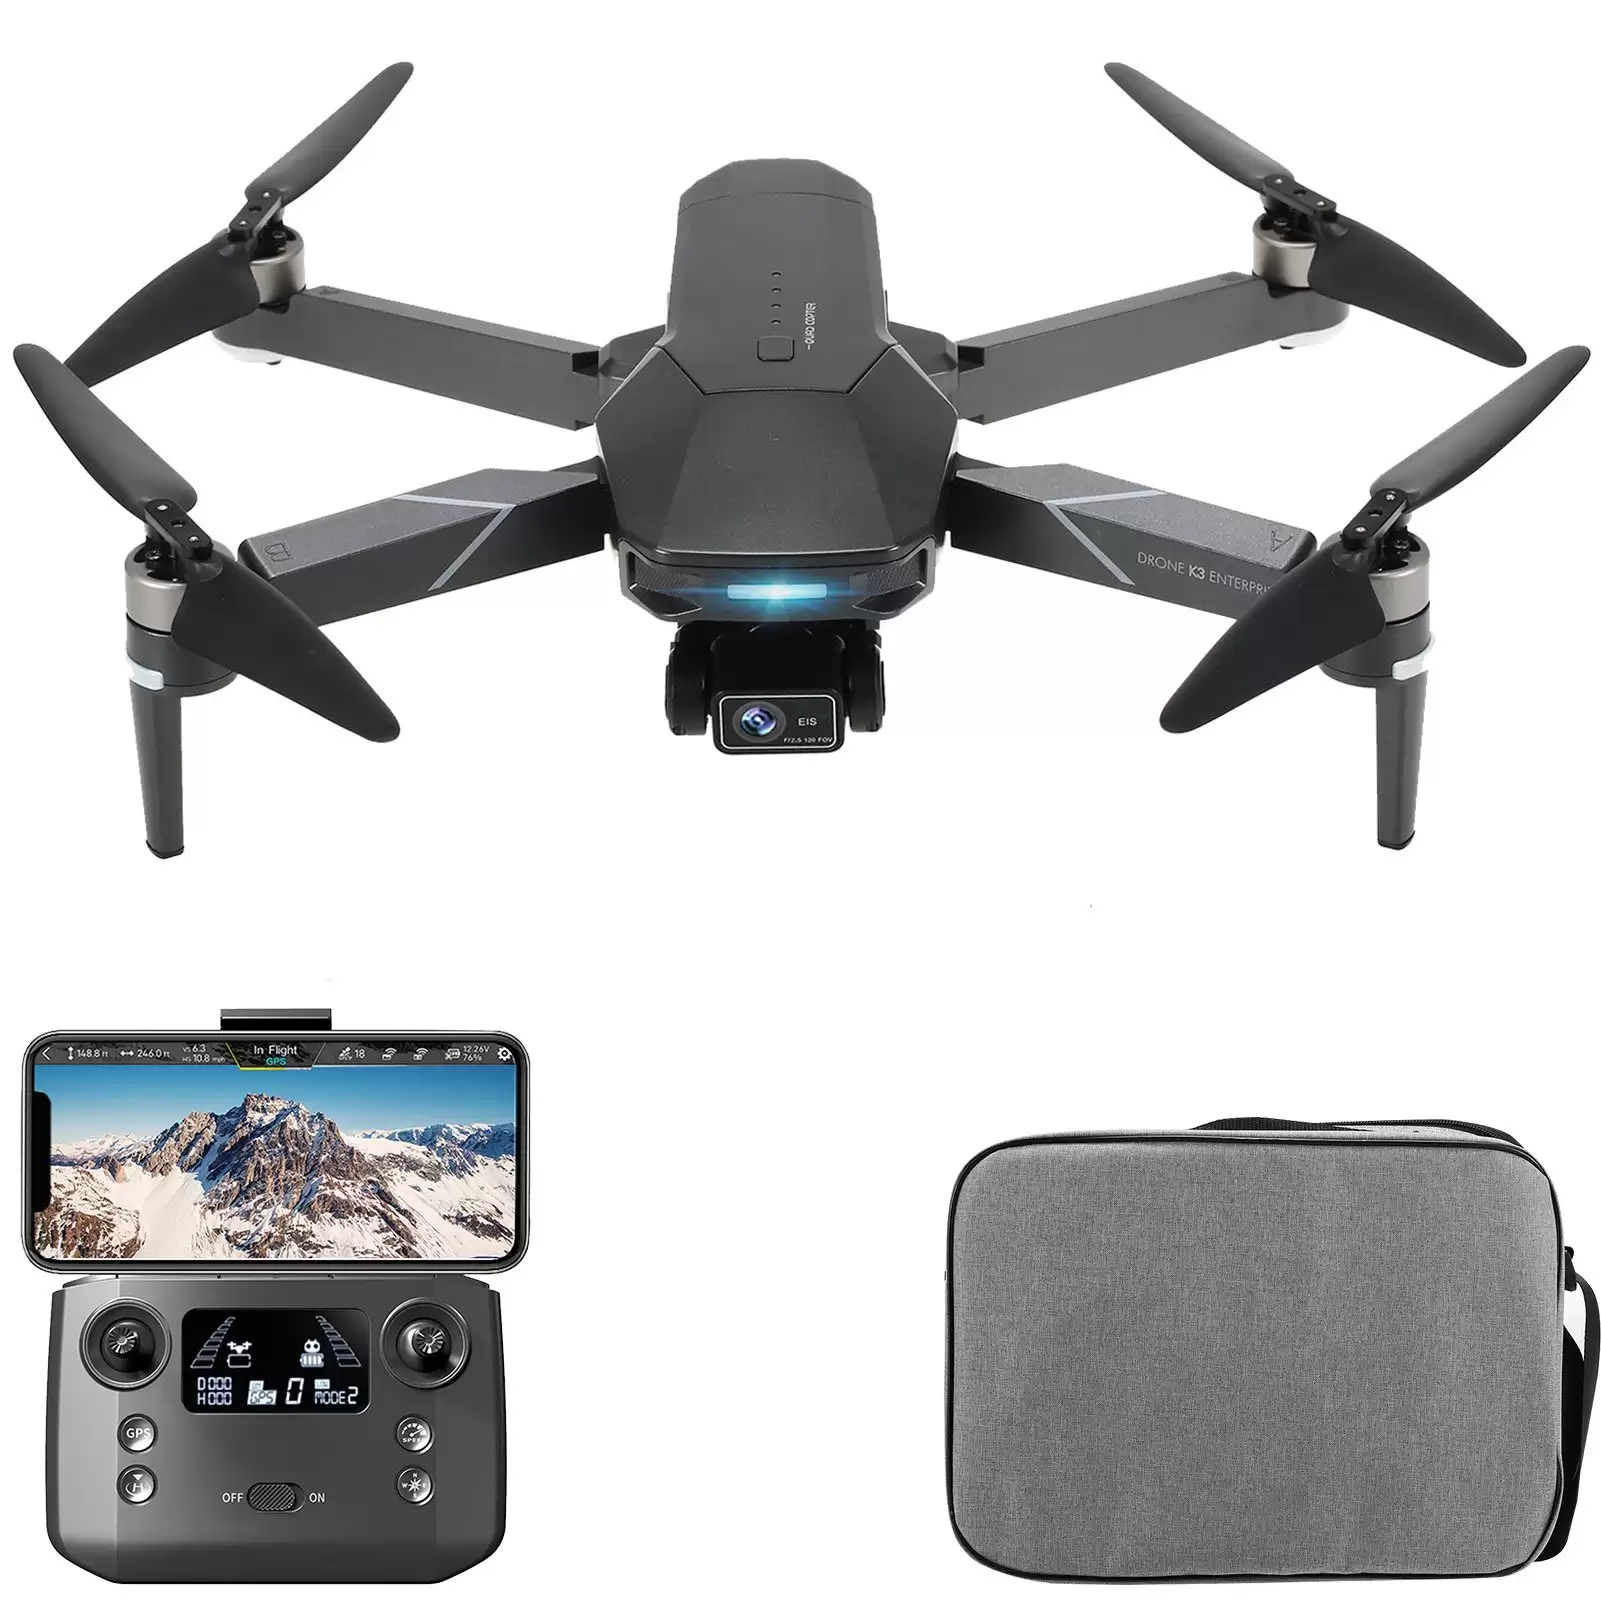 Extra $10 Off On Visuo K3 5g Wifi Fpv Gps Eis 2.7k Camera Rc Drone, Free Shipping $187.99 At Tomtop